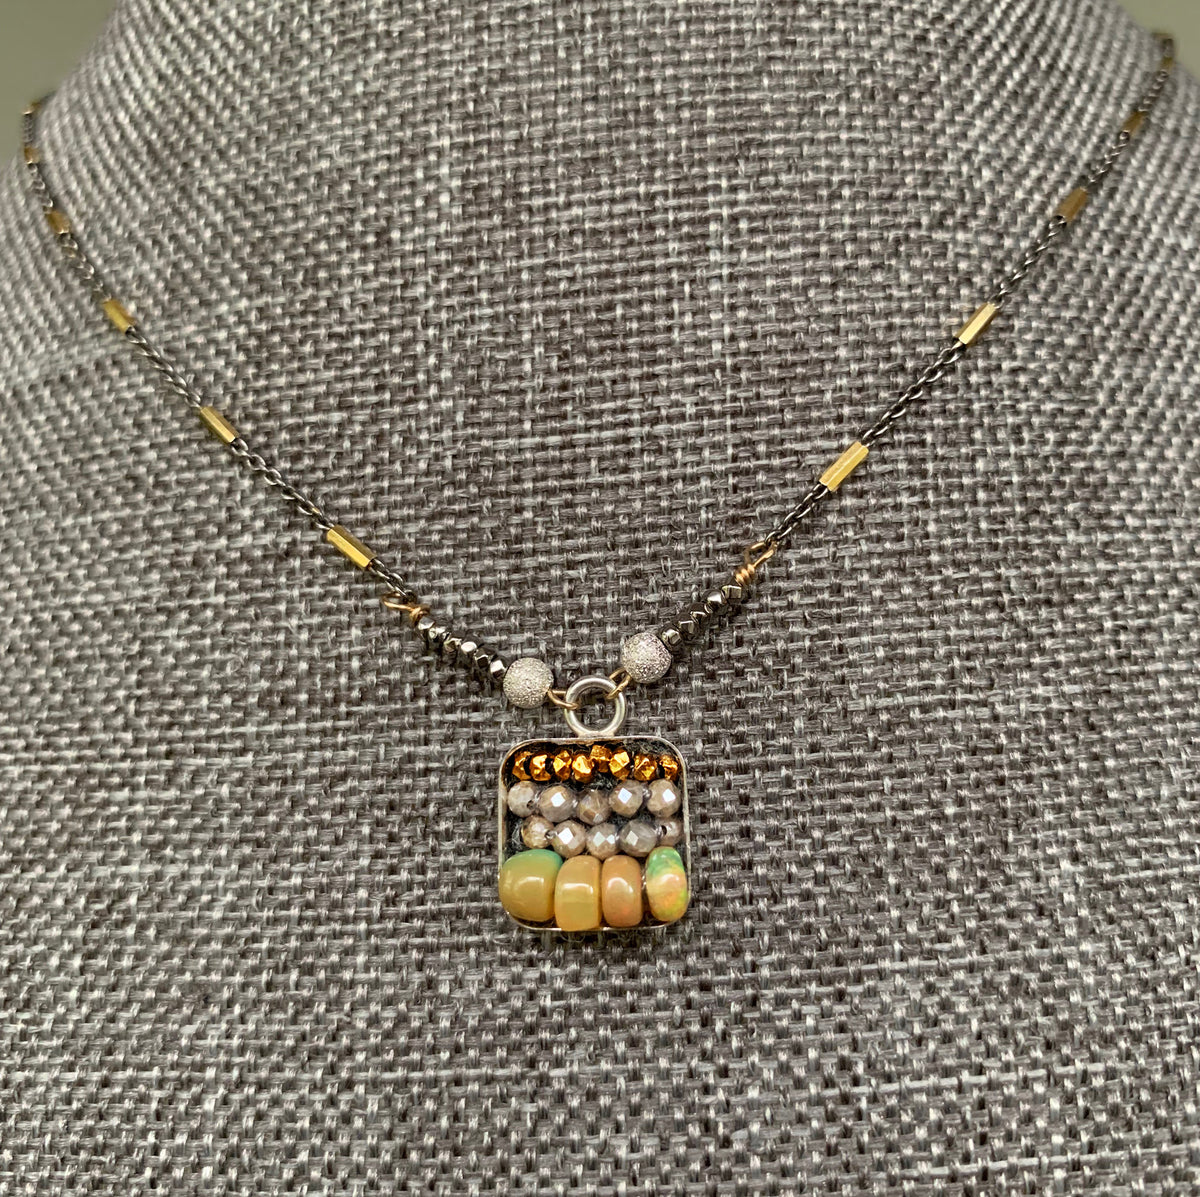 Opal, Labradorite, and Gold mosaic necklace